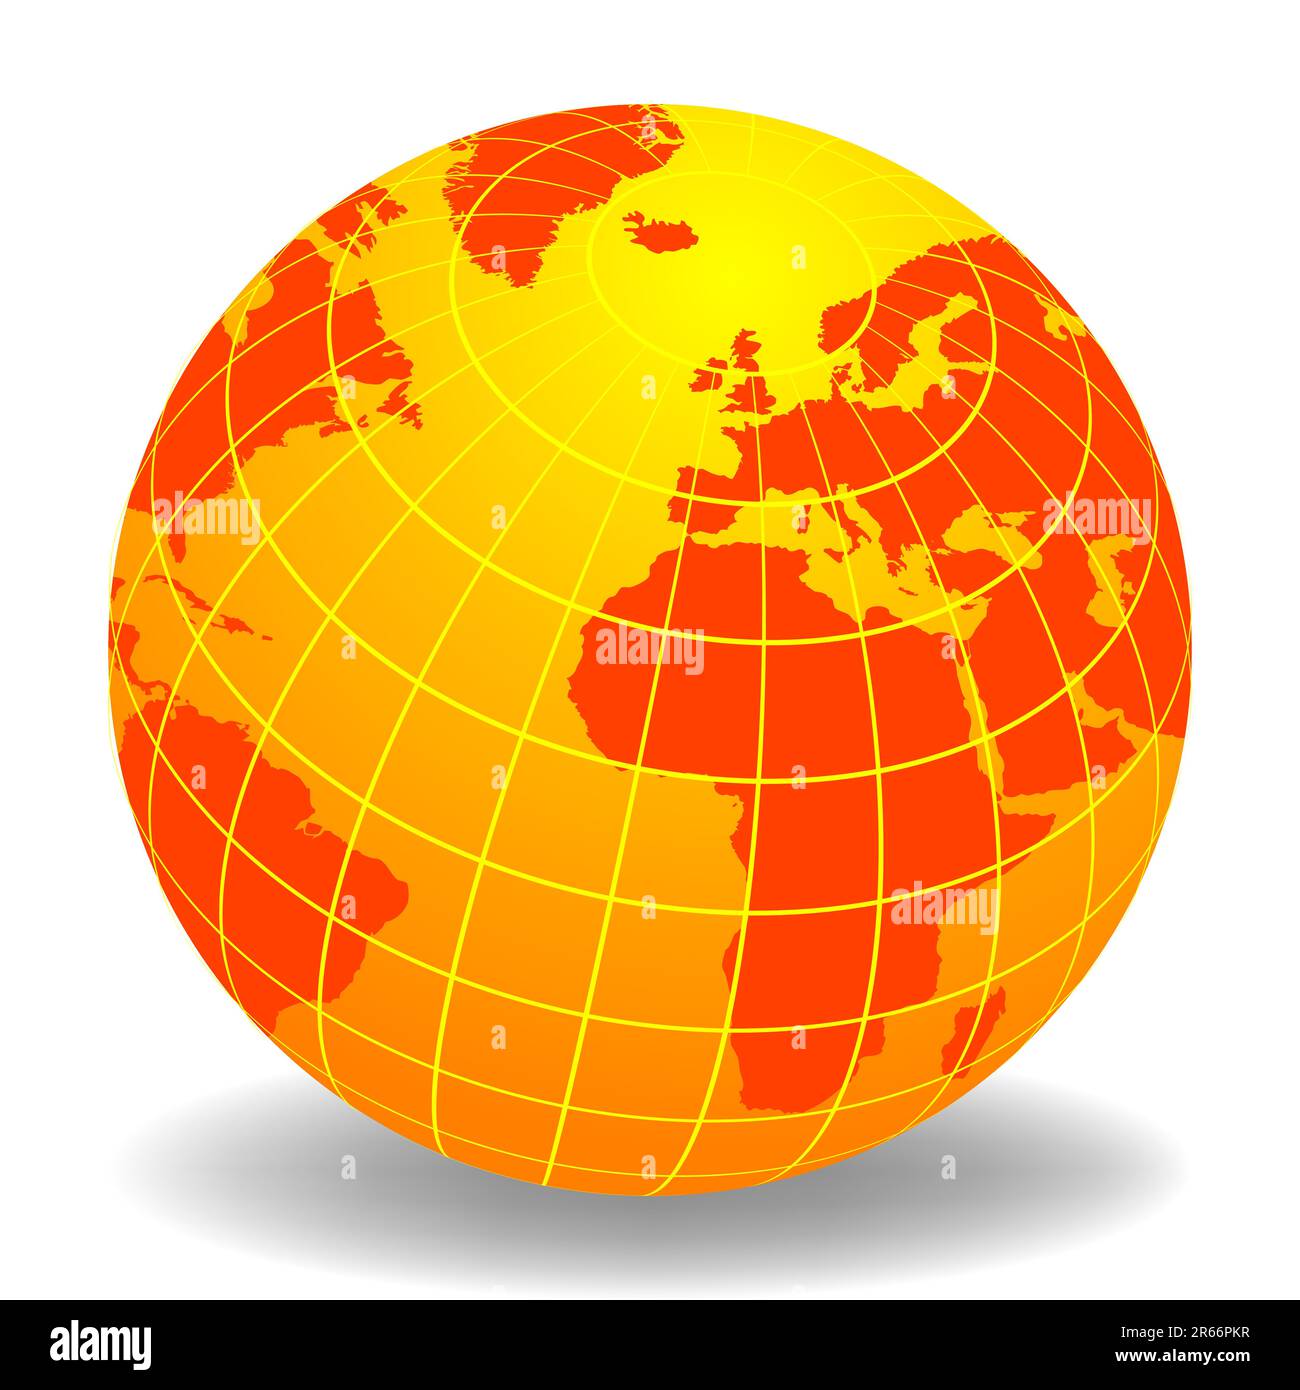 Globe of the World Europe and Africa Stock Vector